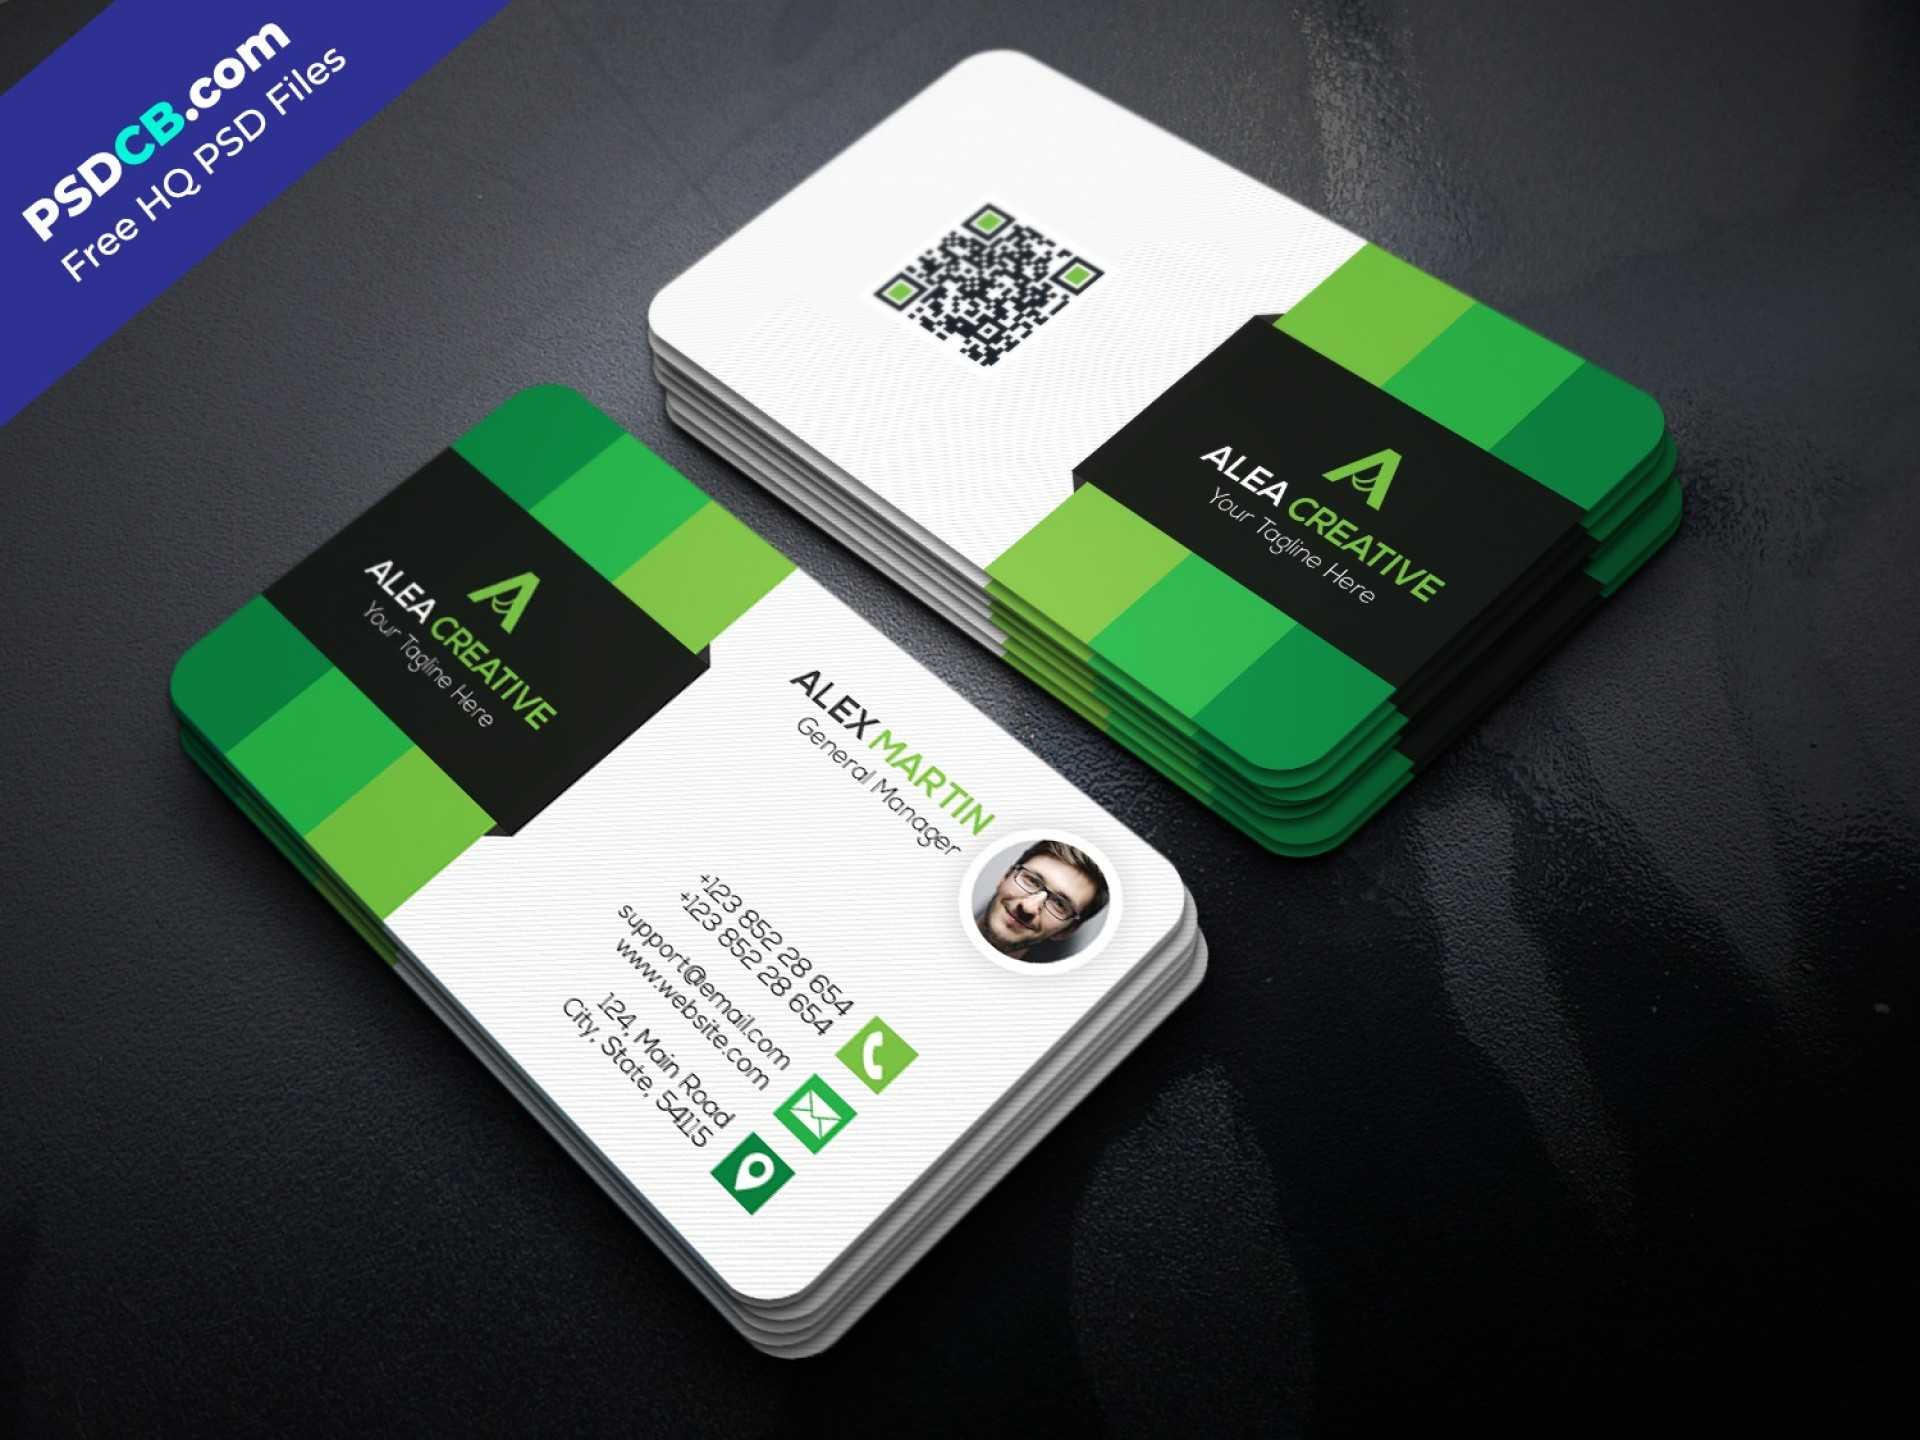 033 Business Card Design For Construction Company Template Intended For Construction Business Card Templates Download Free